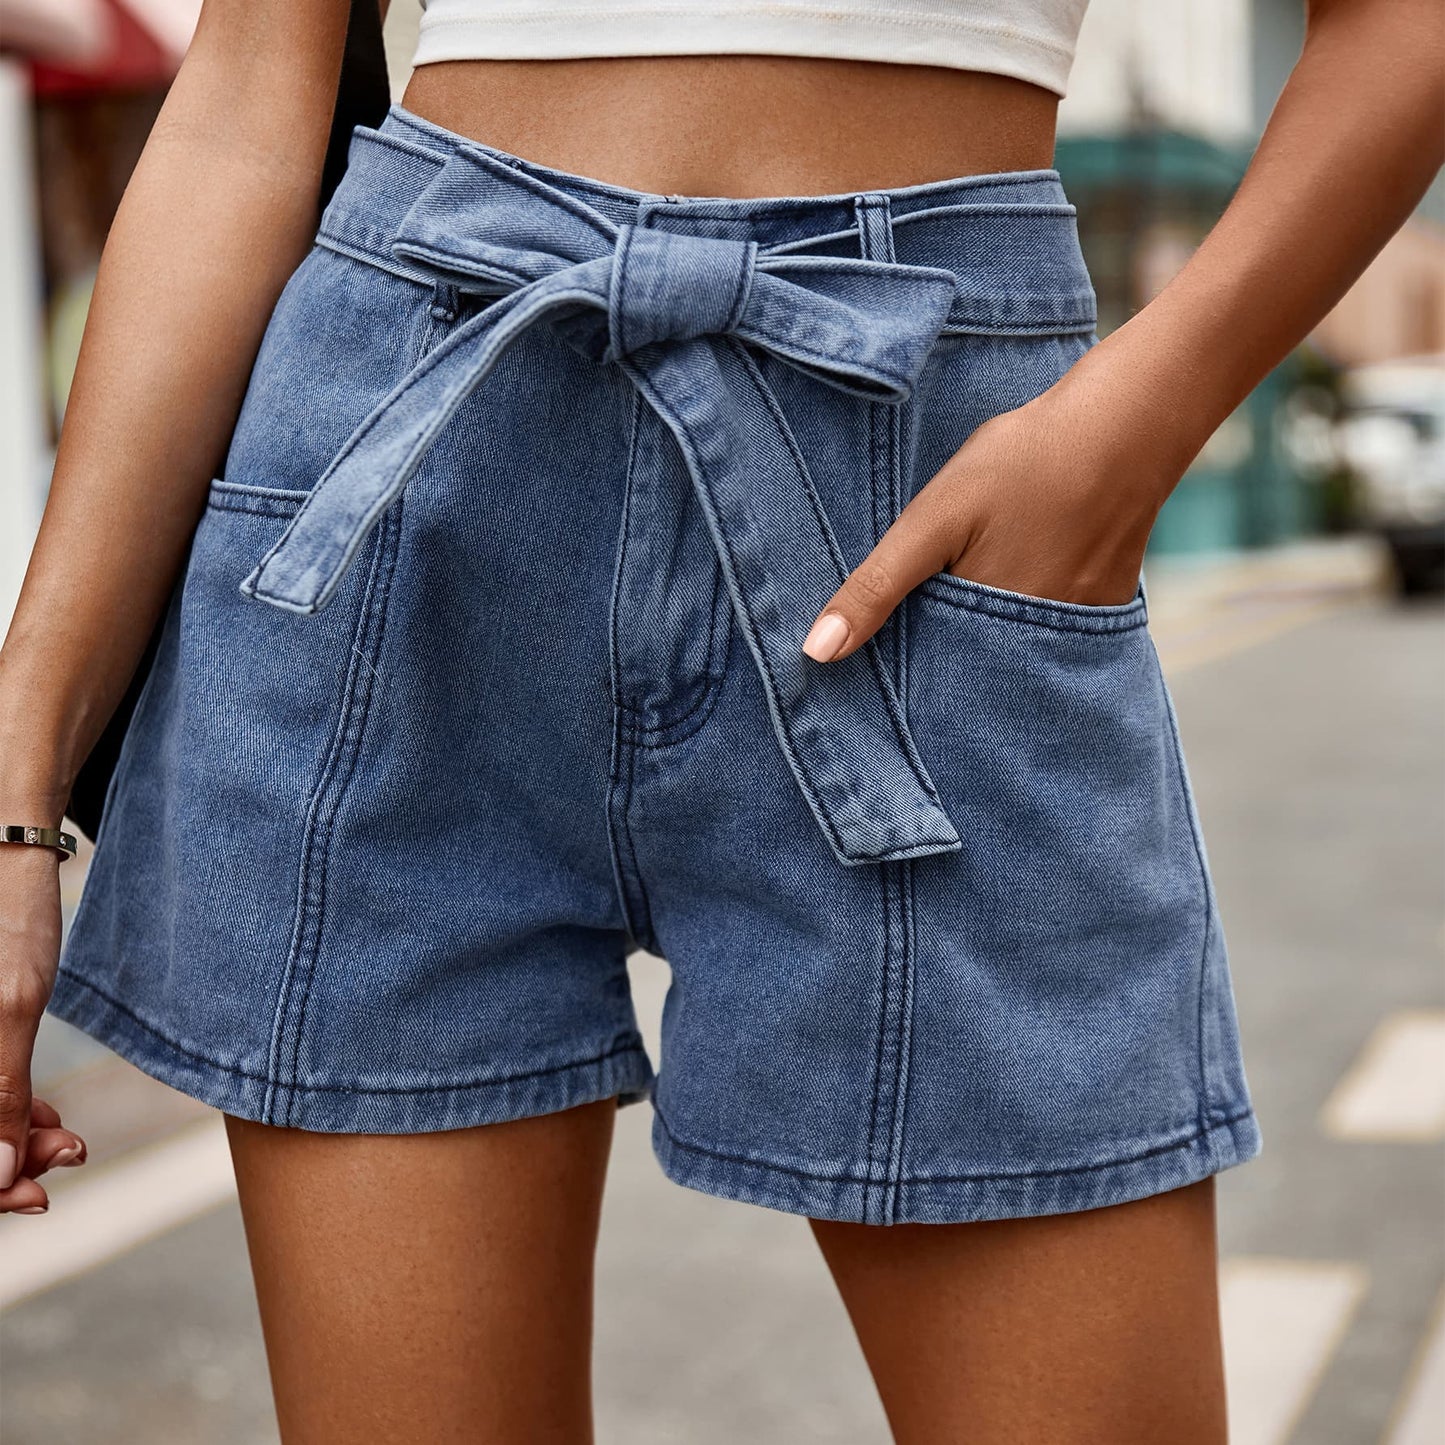 Chic high-waisted denim shorts with a trendy tie belt and convenient pockets, perfect for versatile summer styling